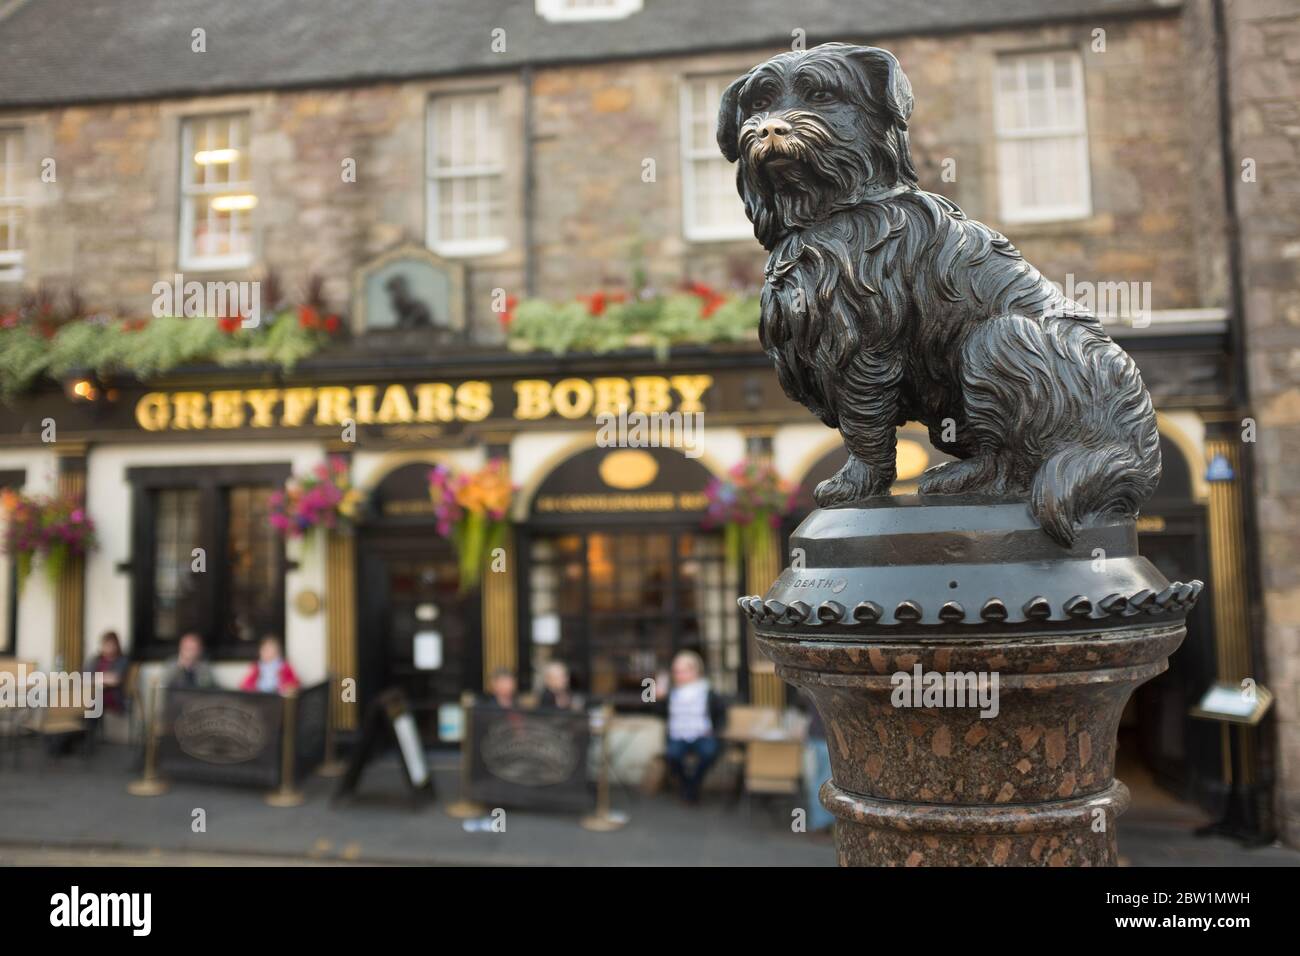 EDINBURGH, SCOTLAND – AUGUST 30, 2017: Famous Statue of Greyfriars Bobby with Pub as seen on August 30, 2017 in Edinburgh, Scotland. The dog supposedl Stock Photo